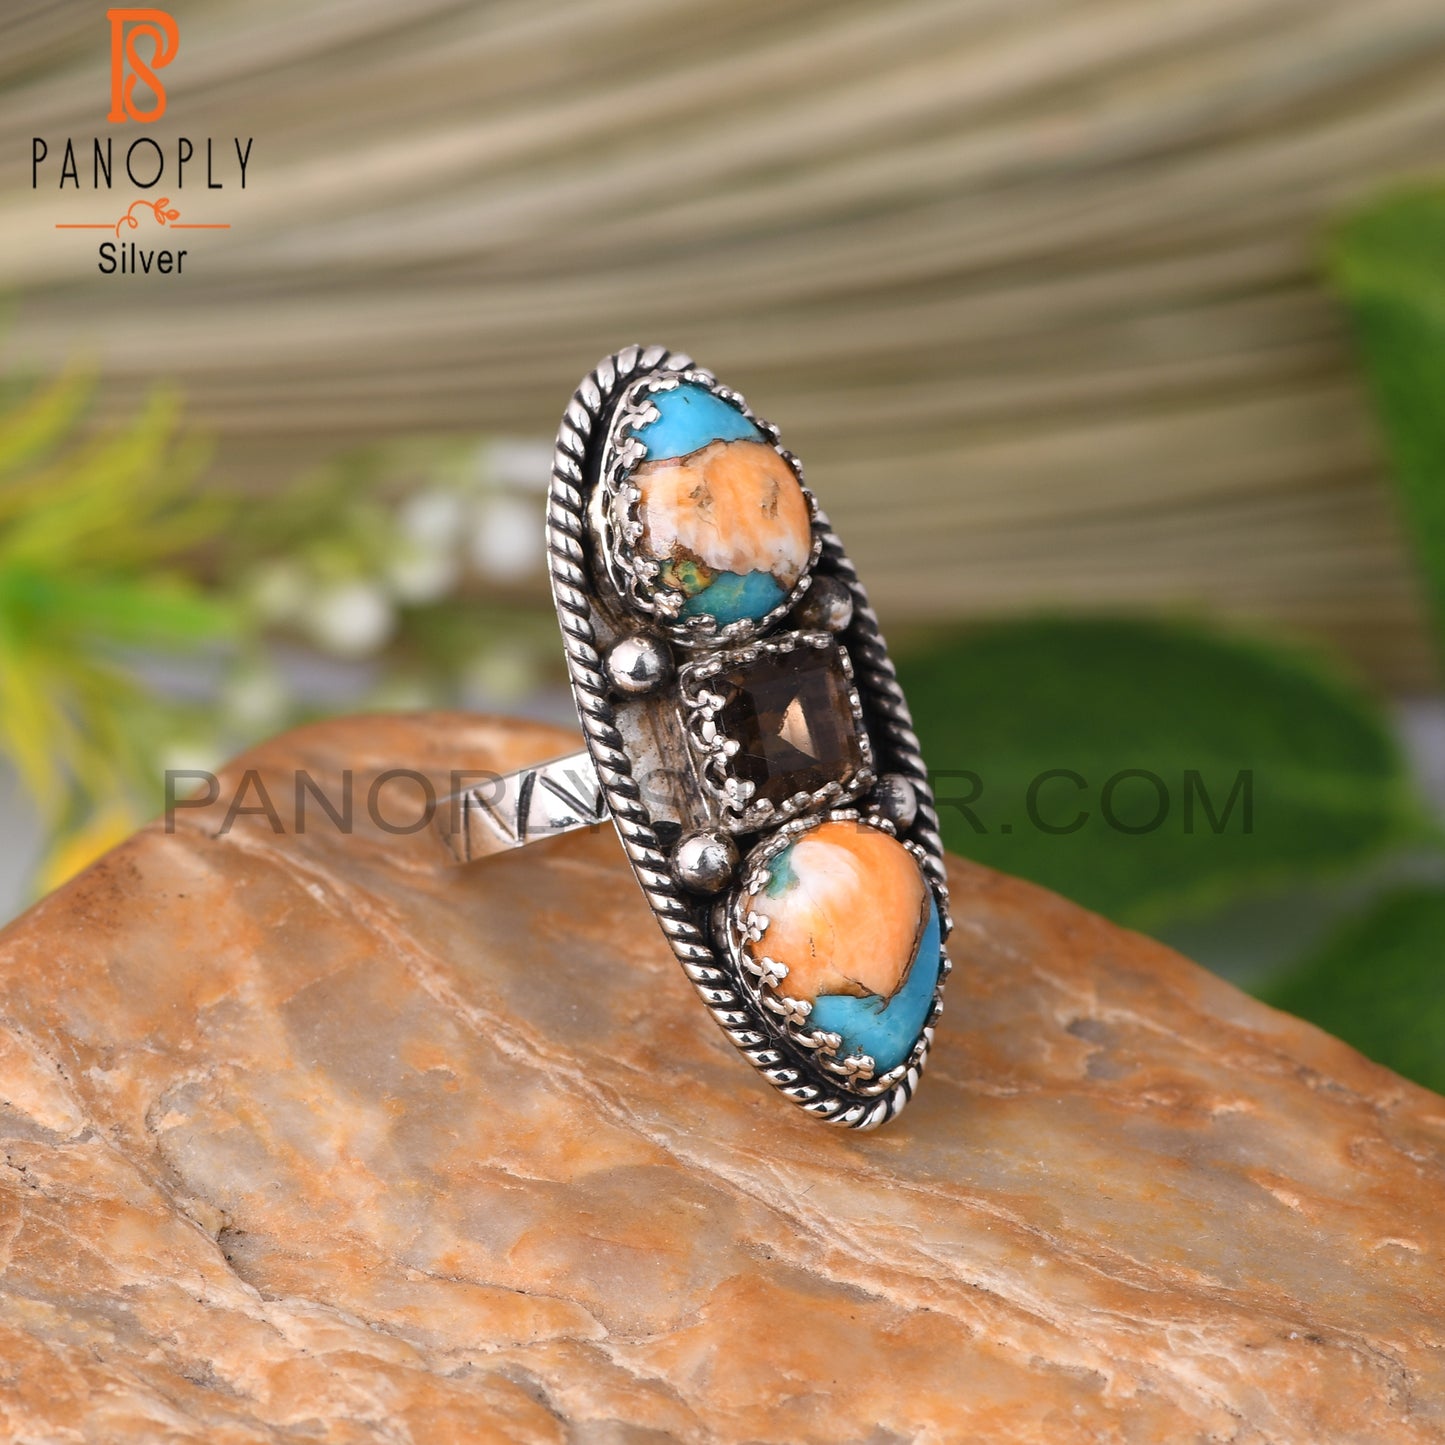 Smoky & Mojave Copper Oyster Turquoise 925 Silver Ring